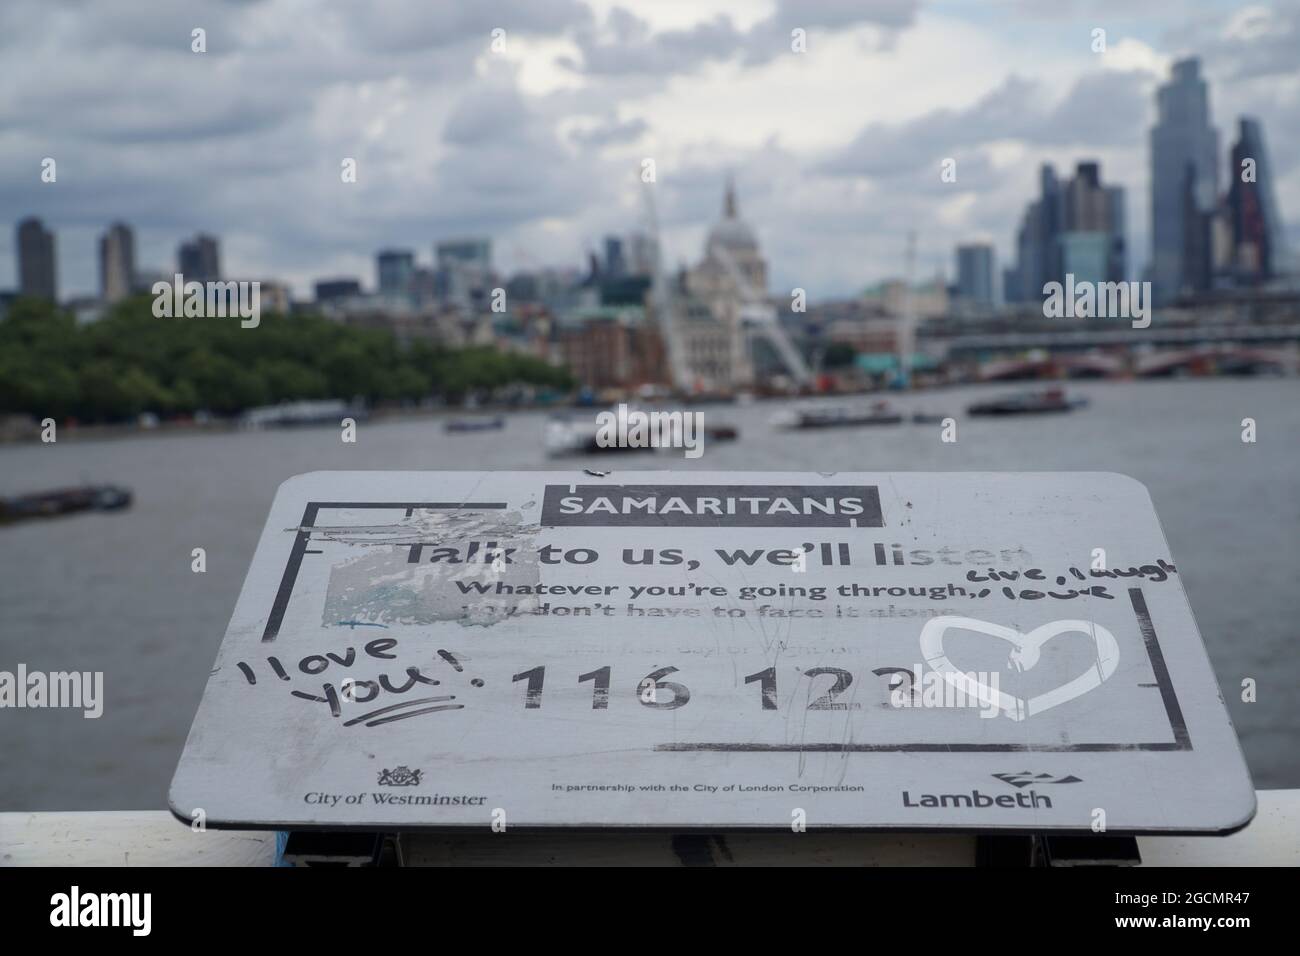 London, UK, 9 August 2021: On Waterloo Bridge a sign encouraging anyone with suicidal thoughts to call the Samaritans help line has been grafittied with supportive messages of love. The River Thames flows below the bridge and the skyscrapers of the City of London are on the horizon, under a cloudy sky. Anna Watson/Alamy Stock Photo